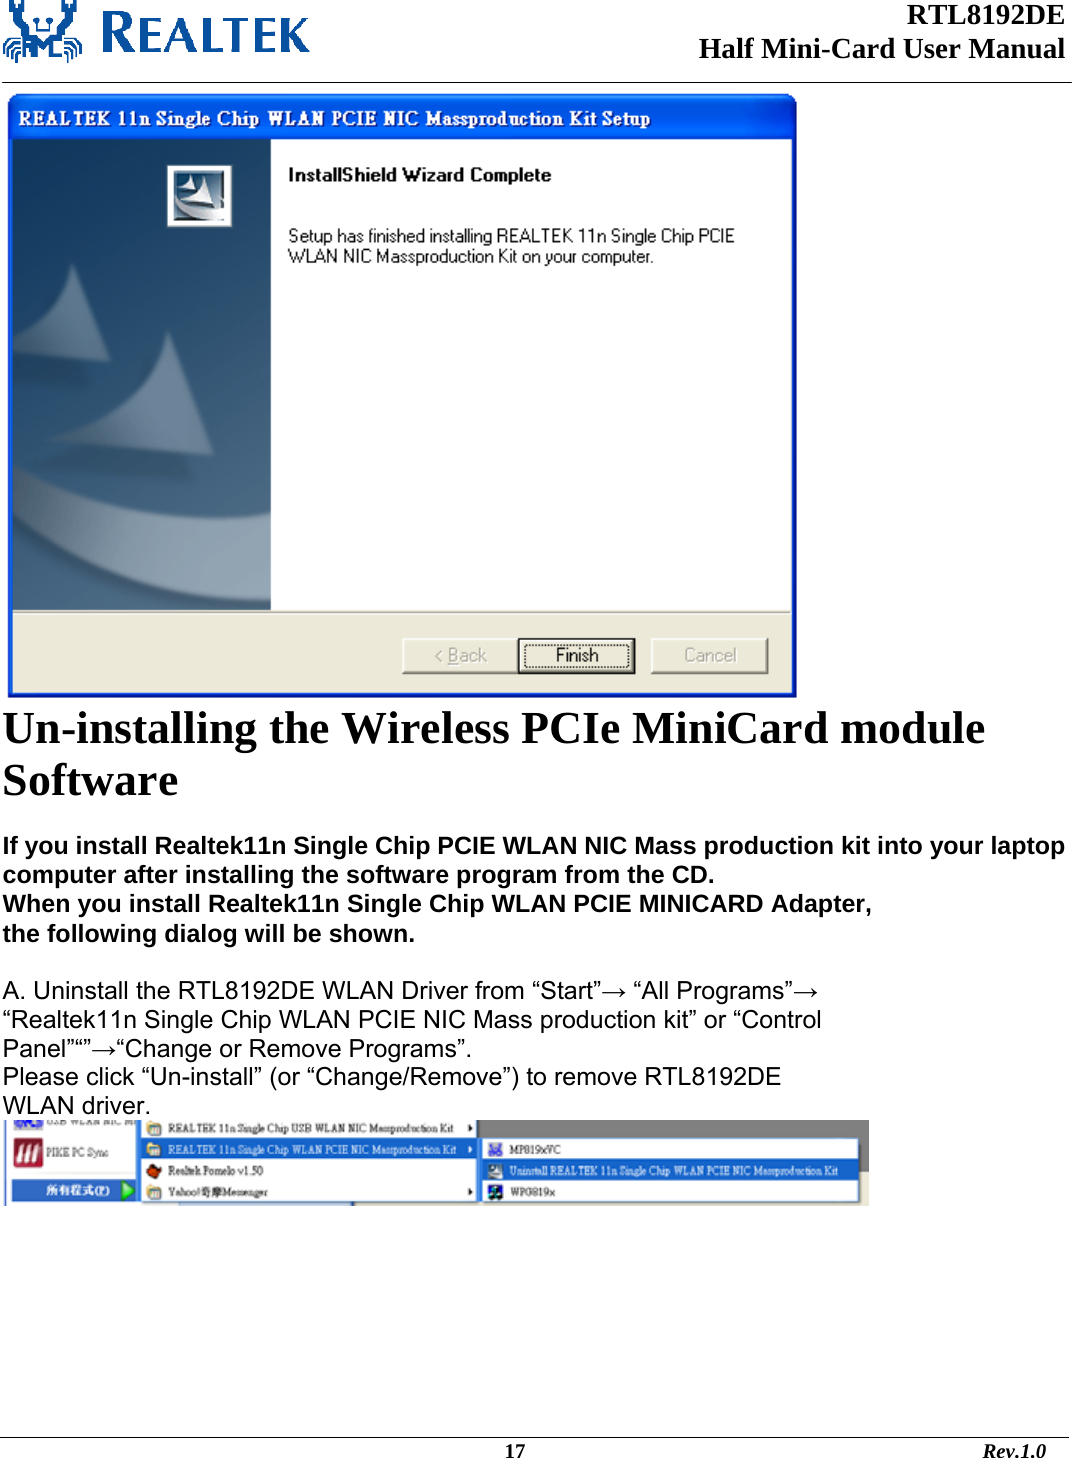 RTL8192DE Half Mini-Card User Manual    Un-installing the Wireless PCIe MiniCard module Software   If you install Realtek11n Single Chip PCIE WLAN NIC Mass production kit into your laptop computer after installing the software program from the CD. When you install Realtek11n Single Chip WLAN PCIE MINICARD Adapter, the following dialog will be shown.  A. Uninstall the RTL8192DE WLAN Driver from “Start”→ “All Programs”→ “Realtek11n Single Chip WLAN PCIE NIC Mass production kit” or “Control Panel”“”→“Change or Remove Programs”. Please click “Un-install” (or “Change/Remove”) to remove RTL8192DE WLAN driver.                                                                                                       17                                                                                       Rev.1.0 